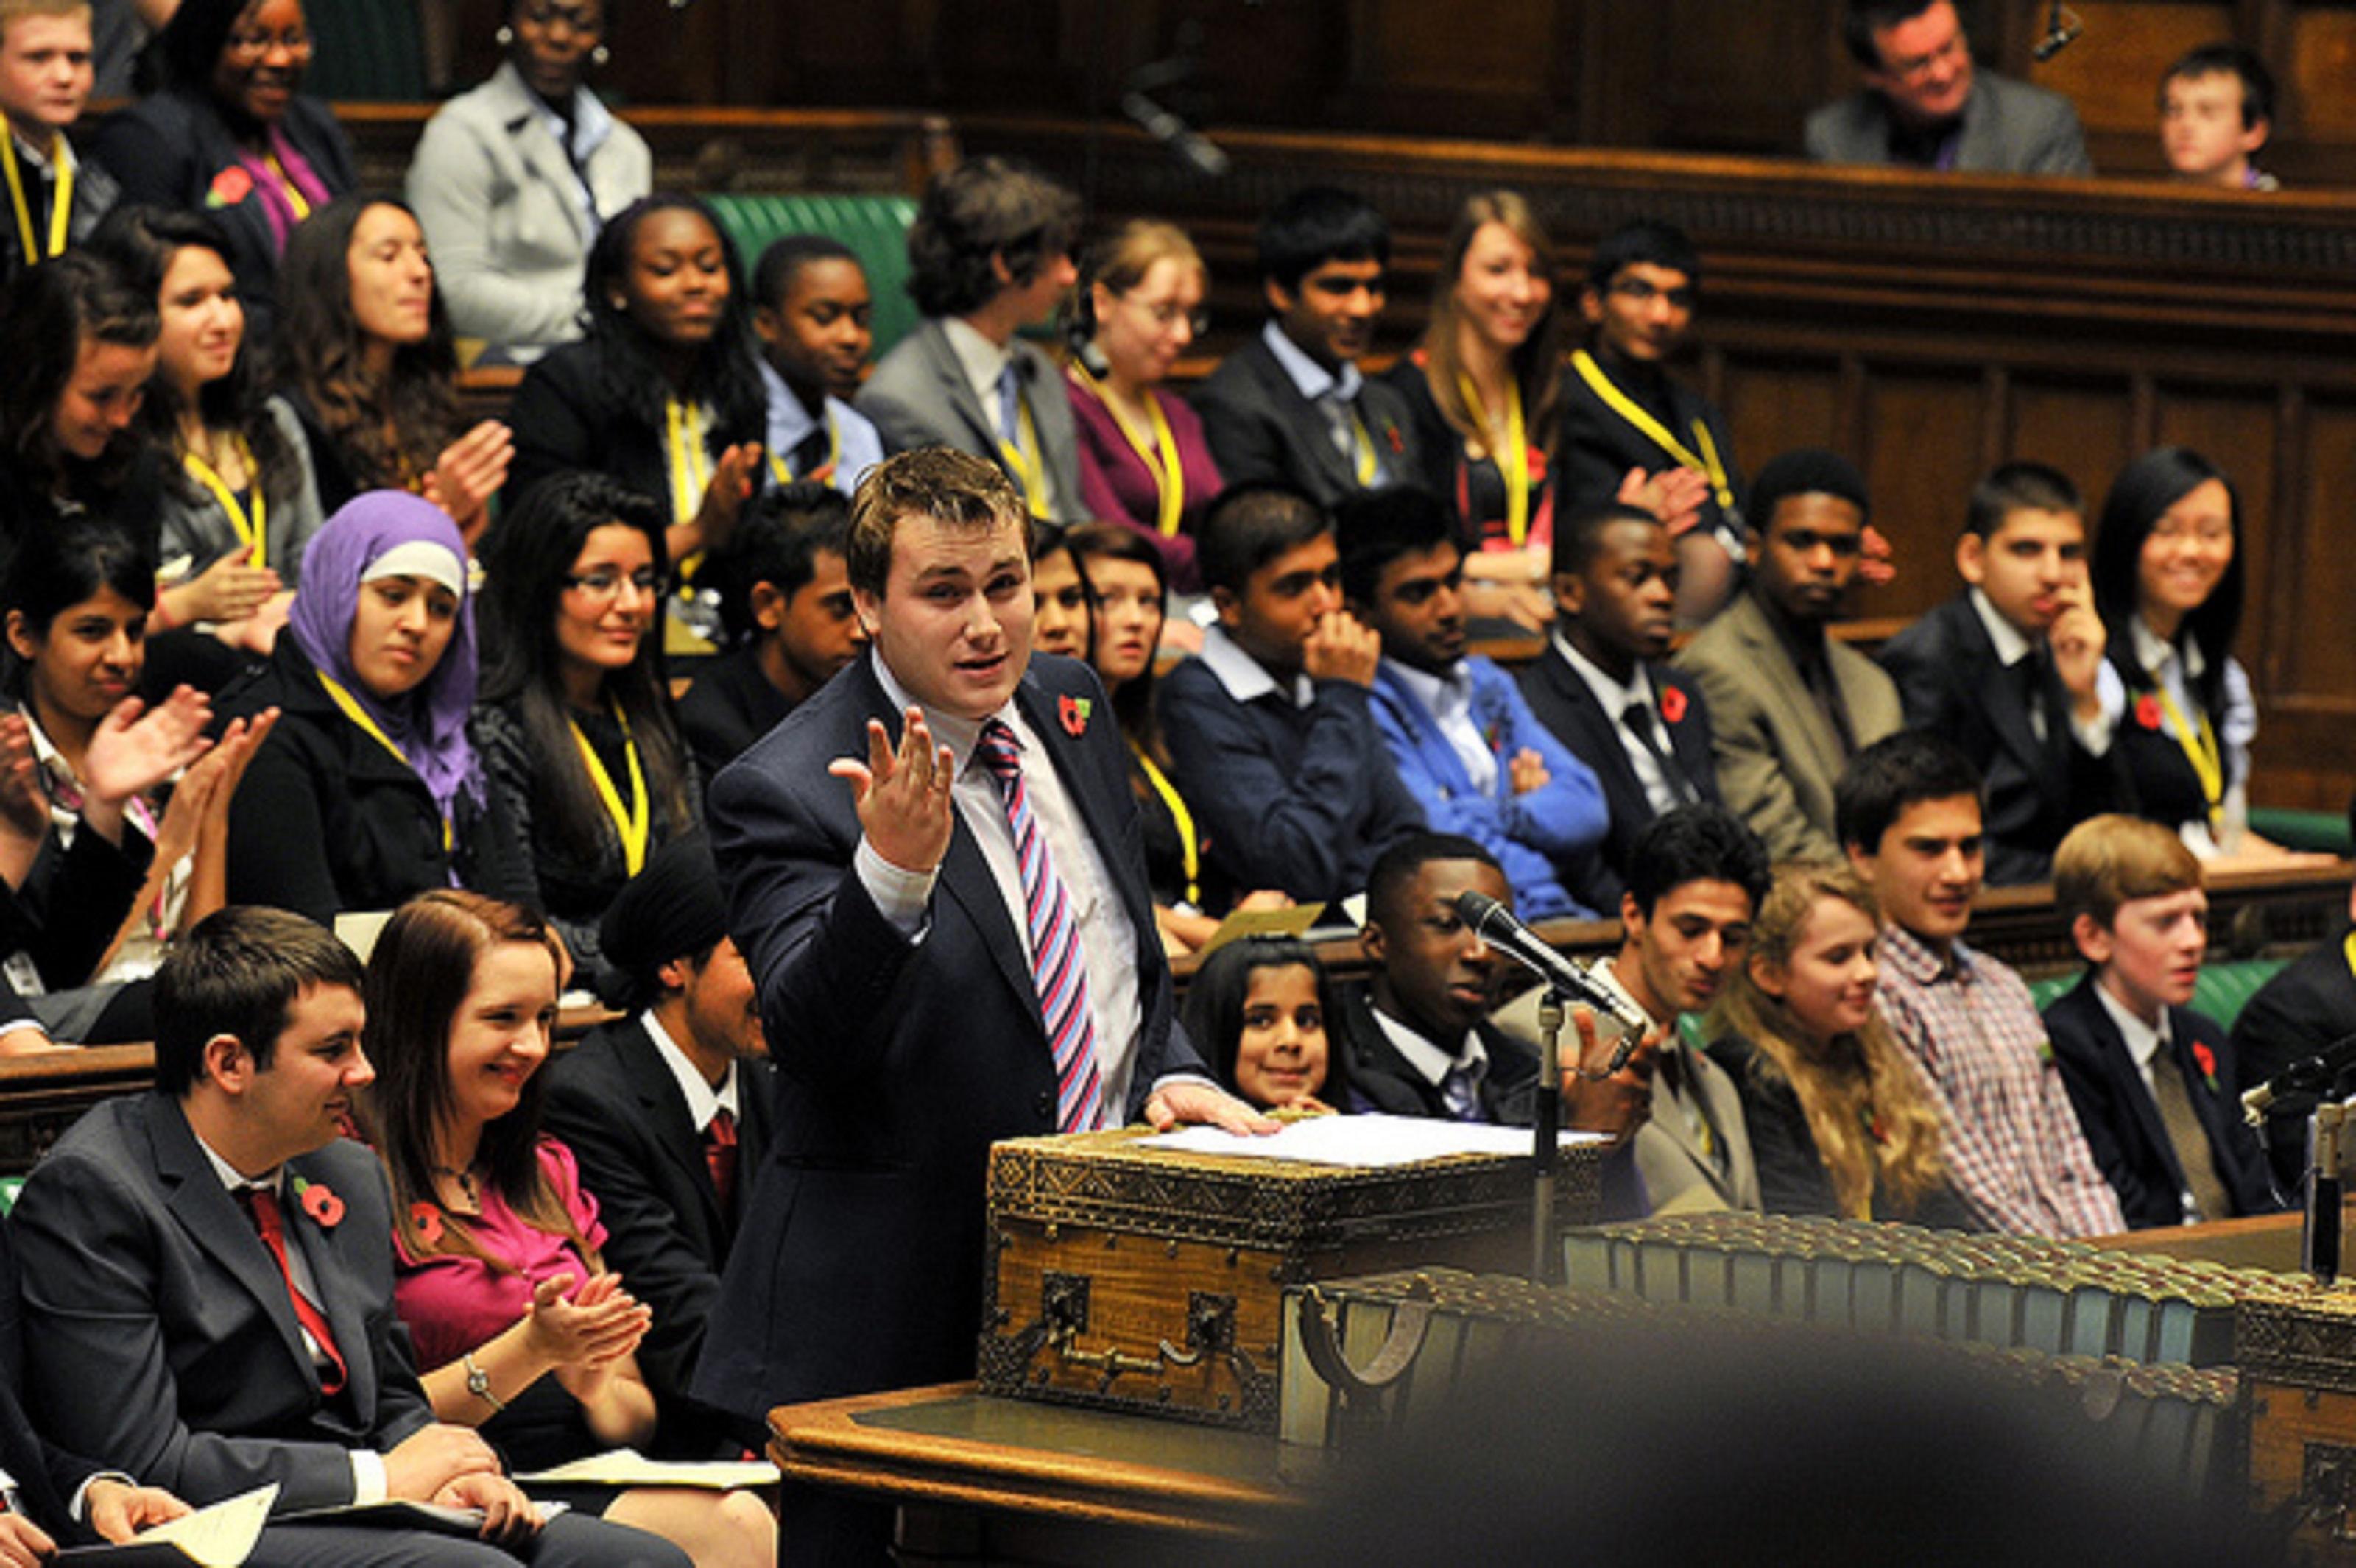 Youth in parliament